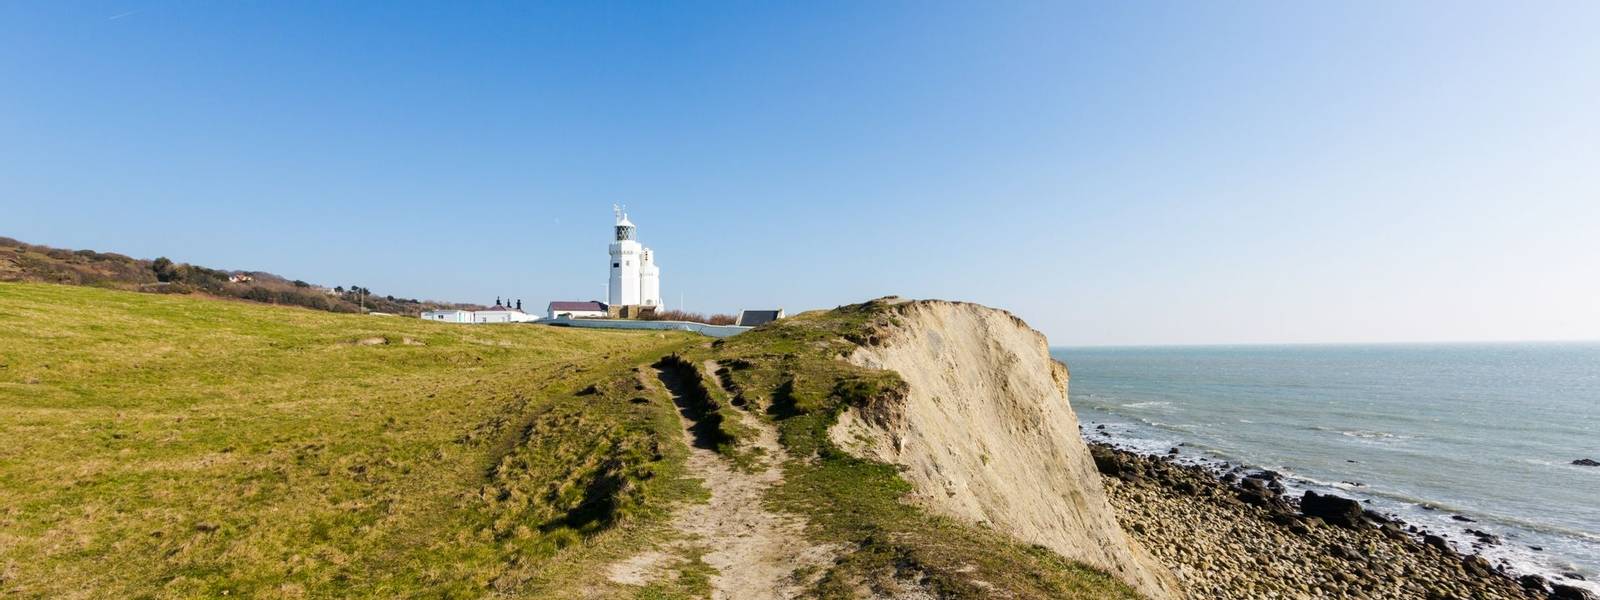 St Catherine's Lighthouse on Isle of Wight at Watershoot Bay in England